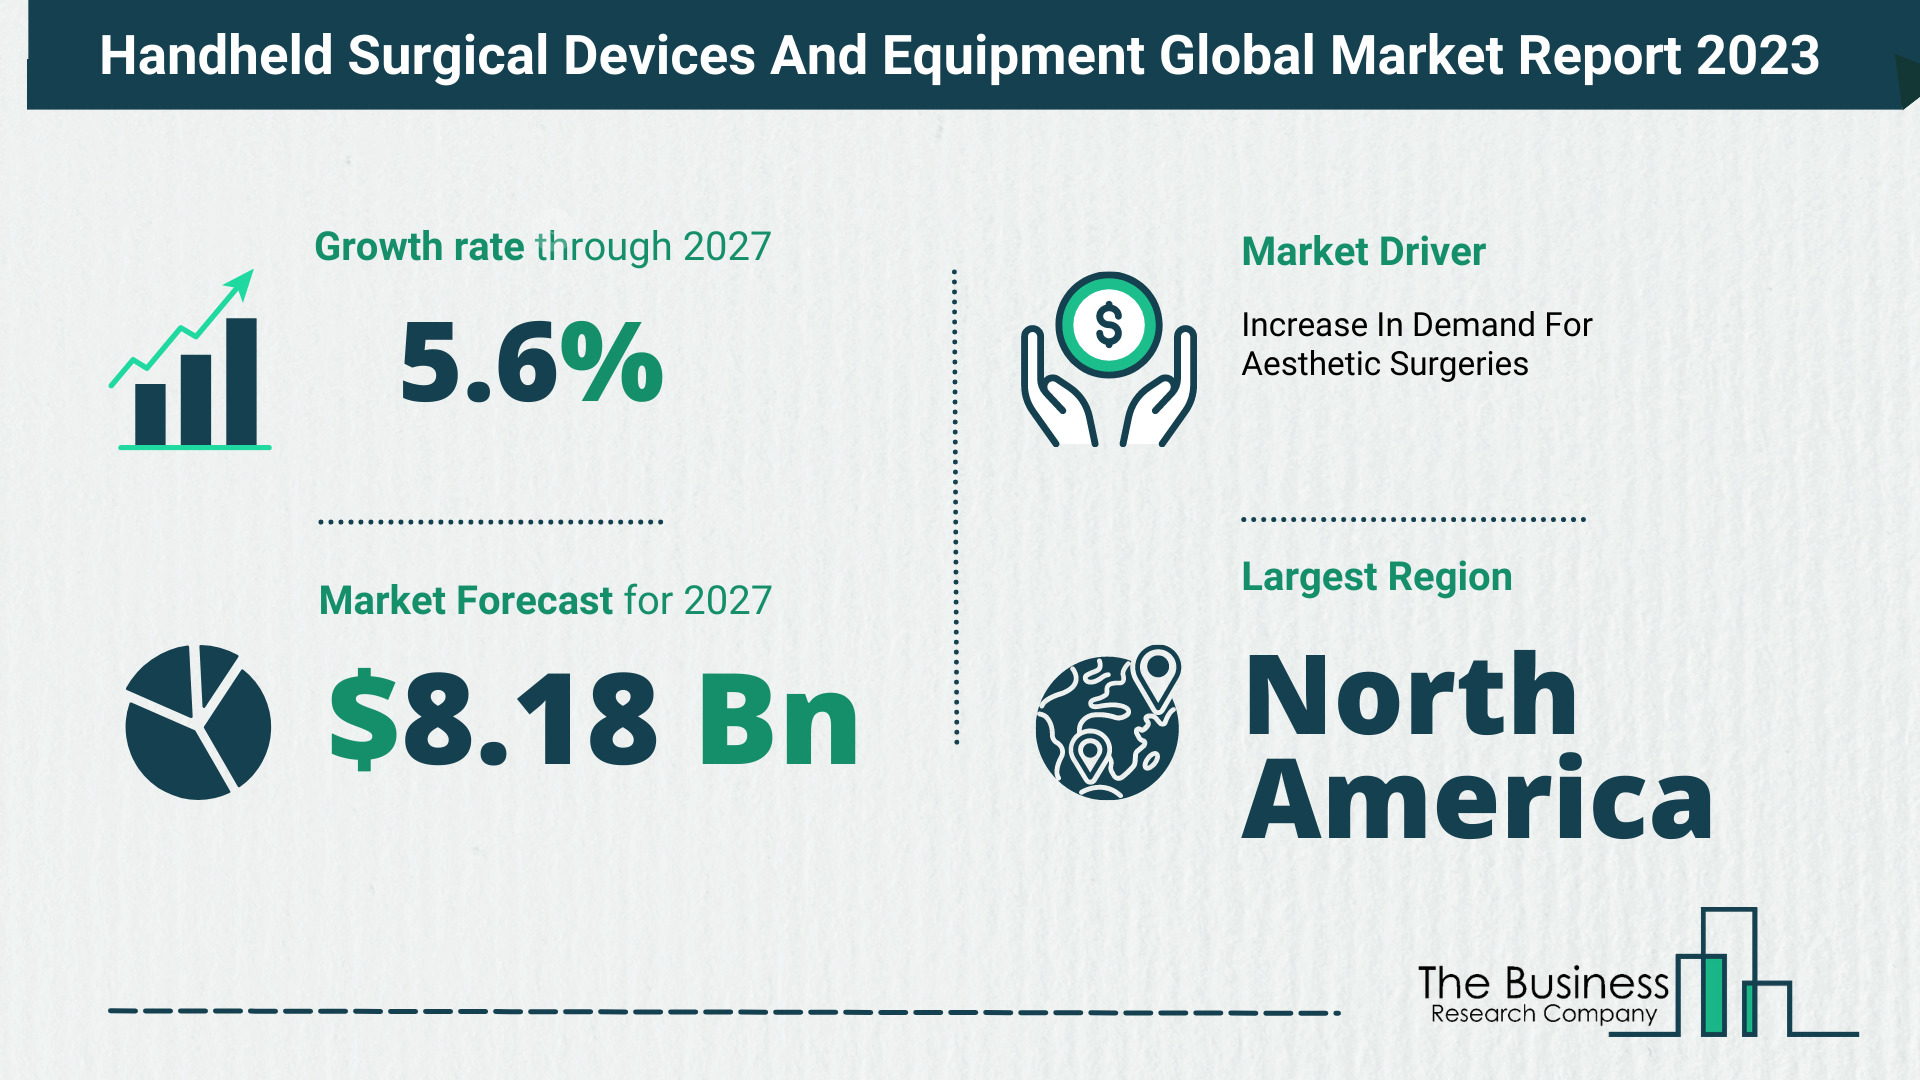 Handheld Surgical Devices And Equipment Market Overview: Market Size, Drivers And Trends